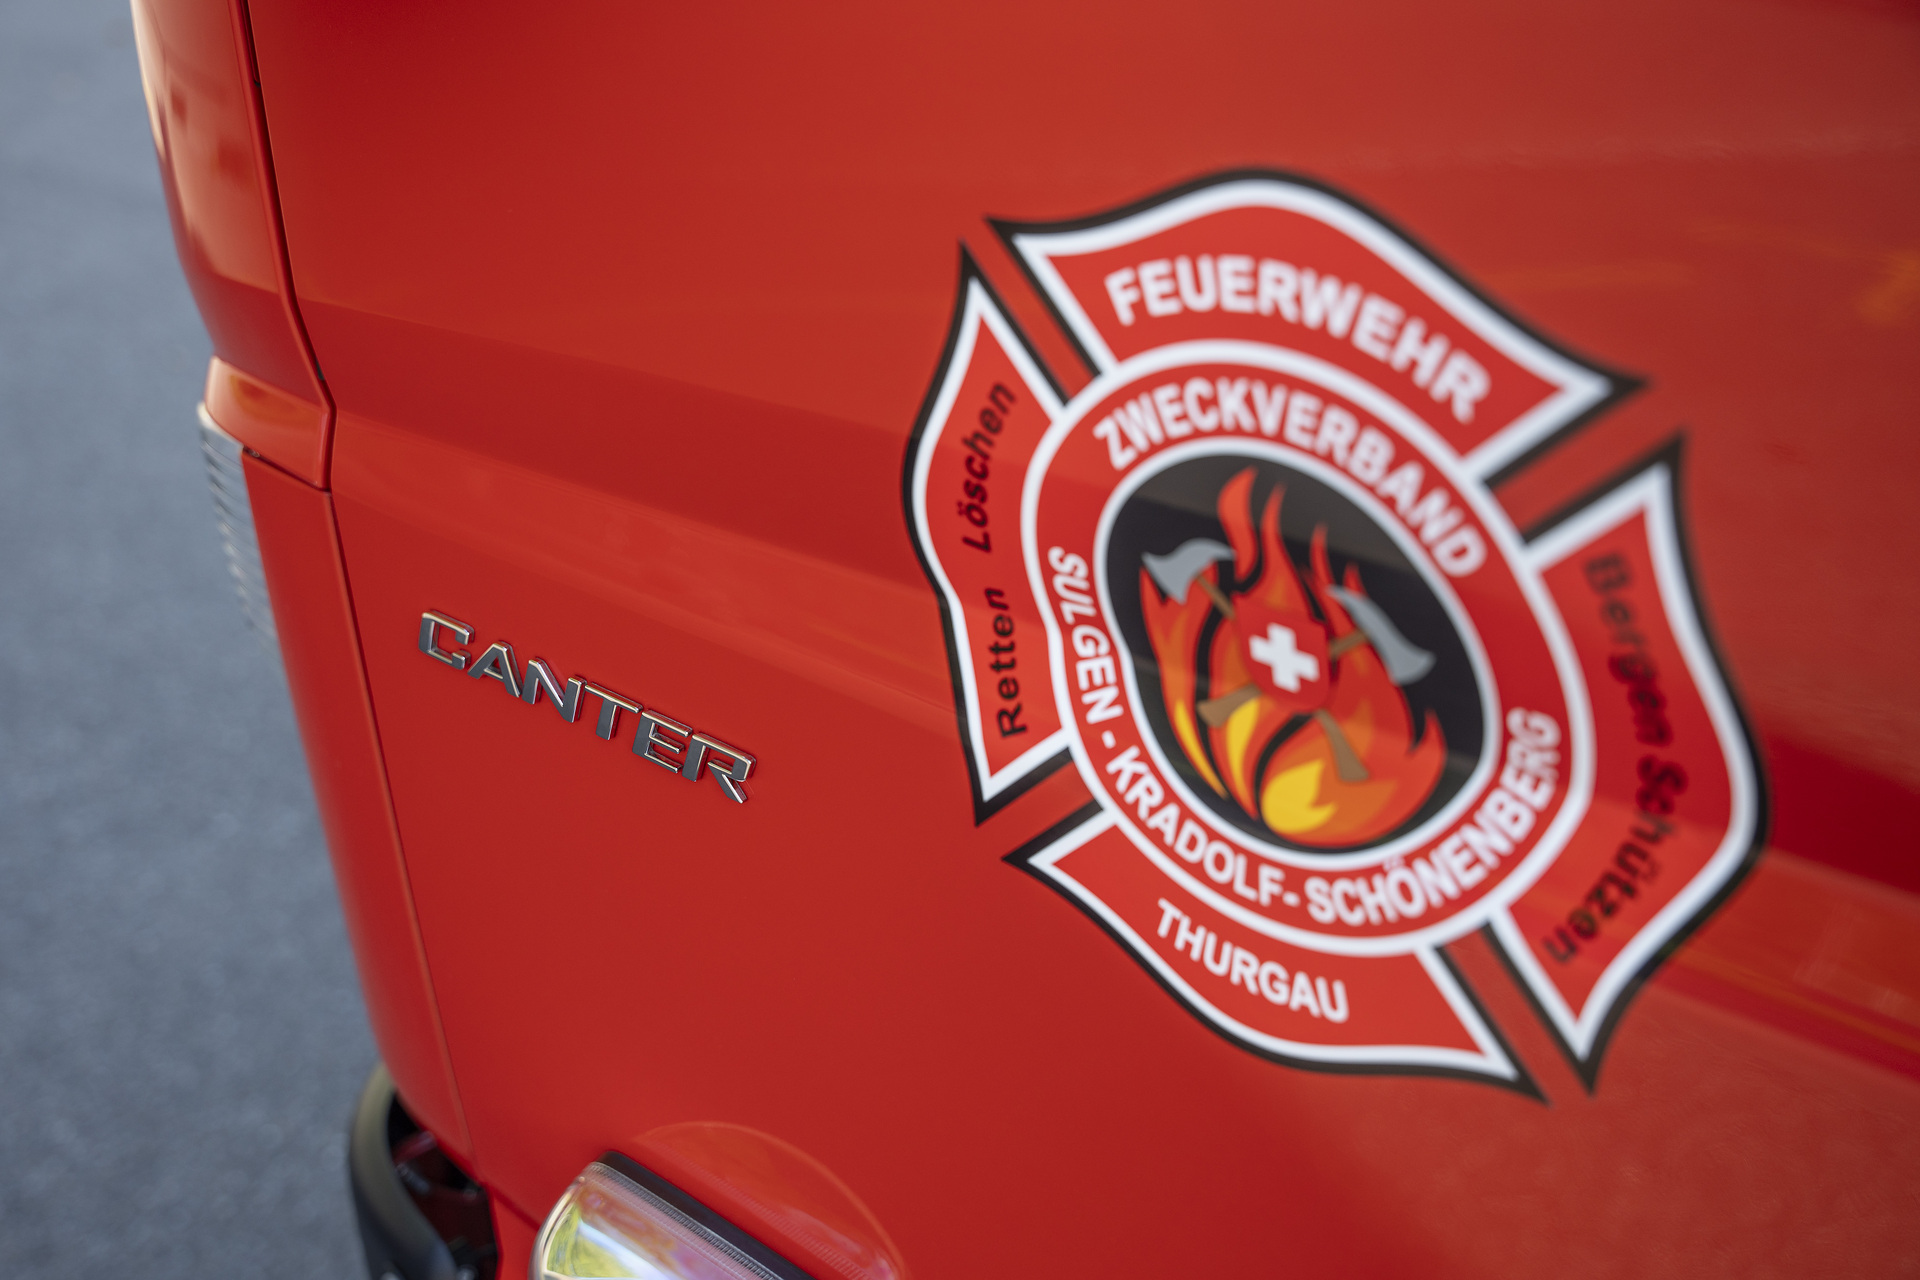 Rescue, extinguish, recover, protect: FUSO Canter 4x4 for the Swiss fire brigade